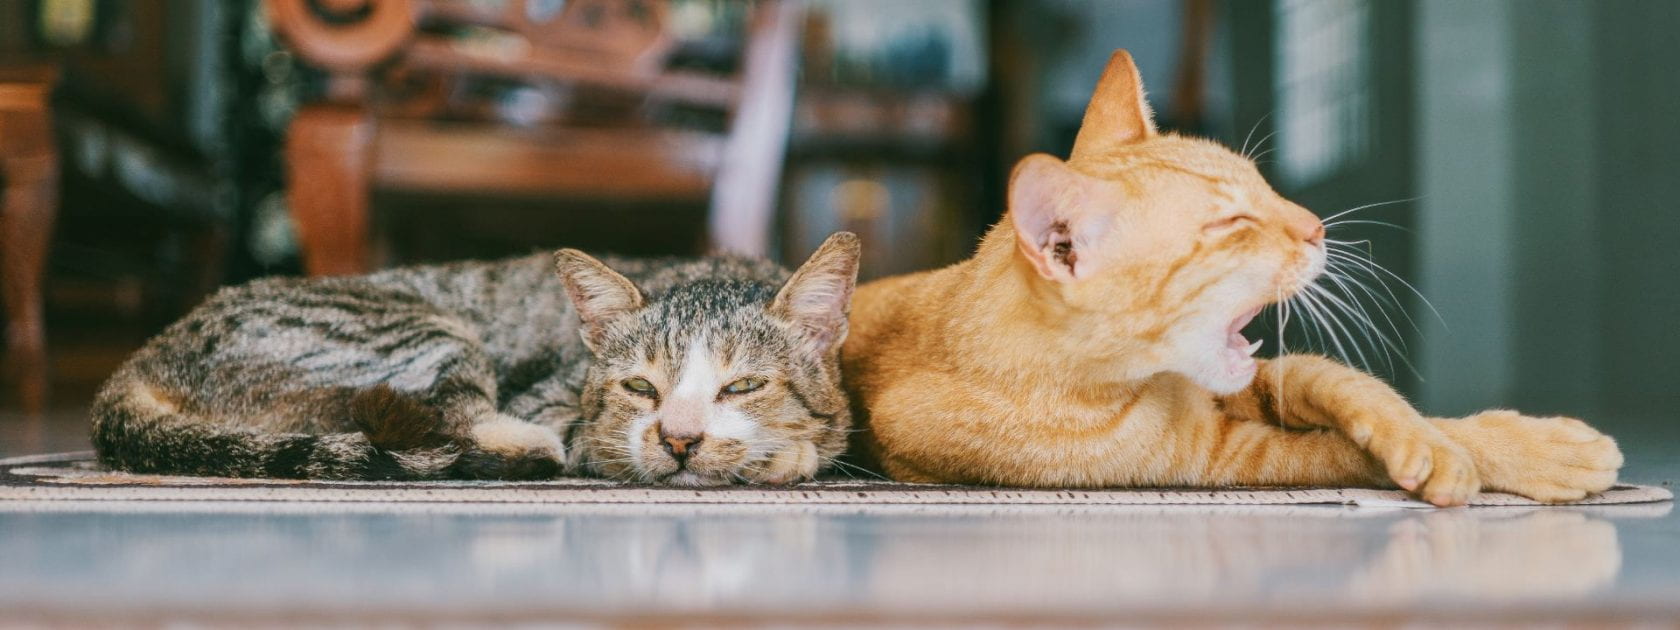 Photo of two cats, a brown tabby and an orange tabby, resting together. The orange tabby is yawning.